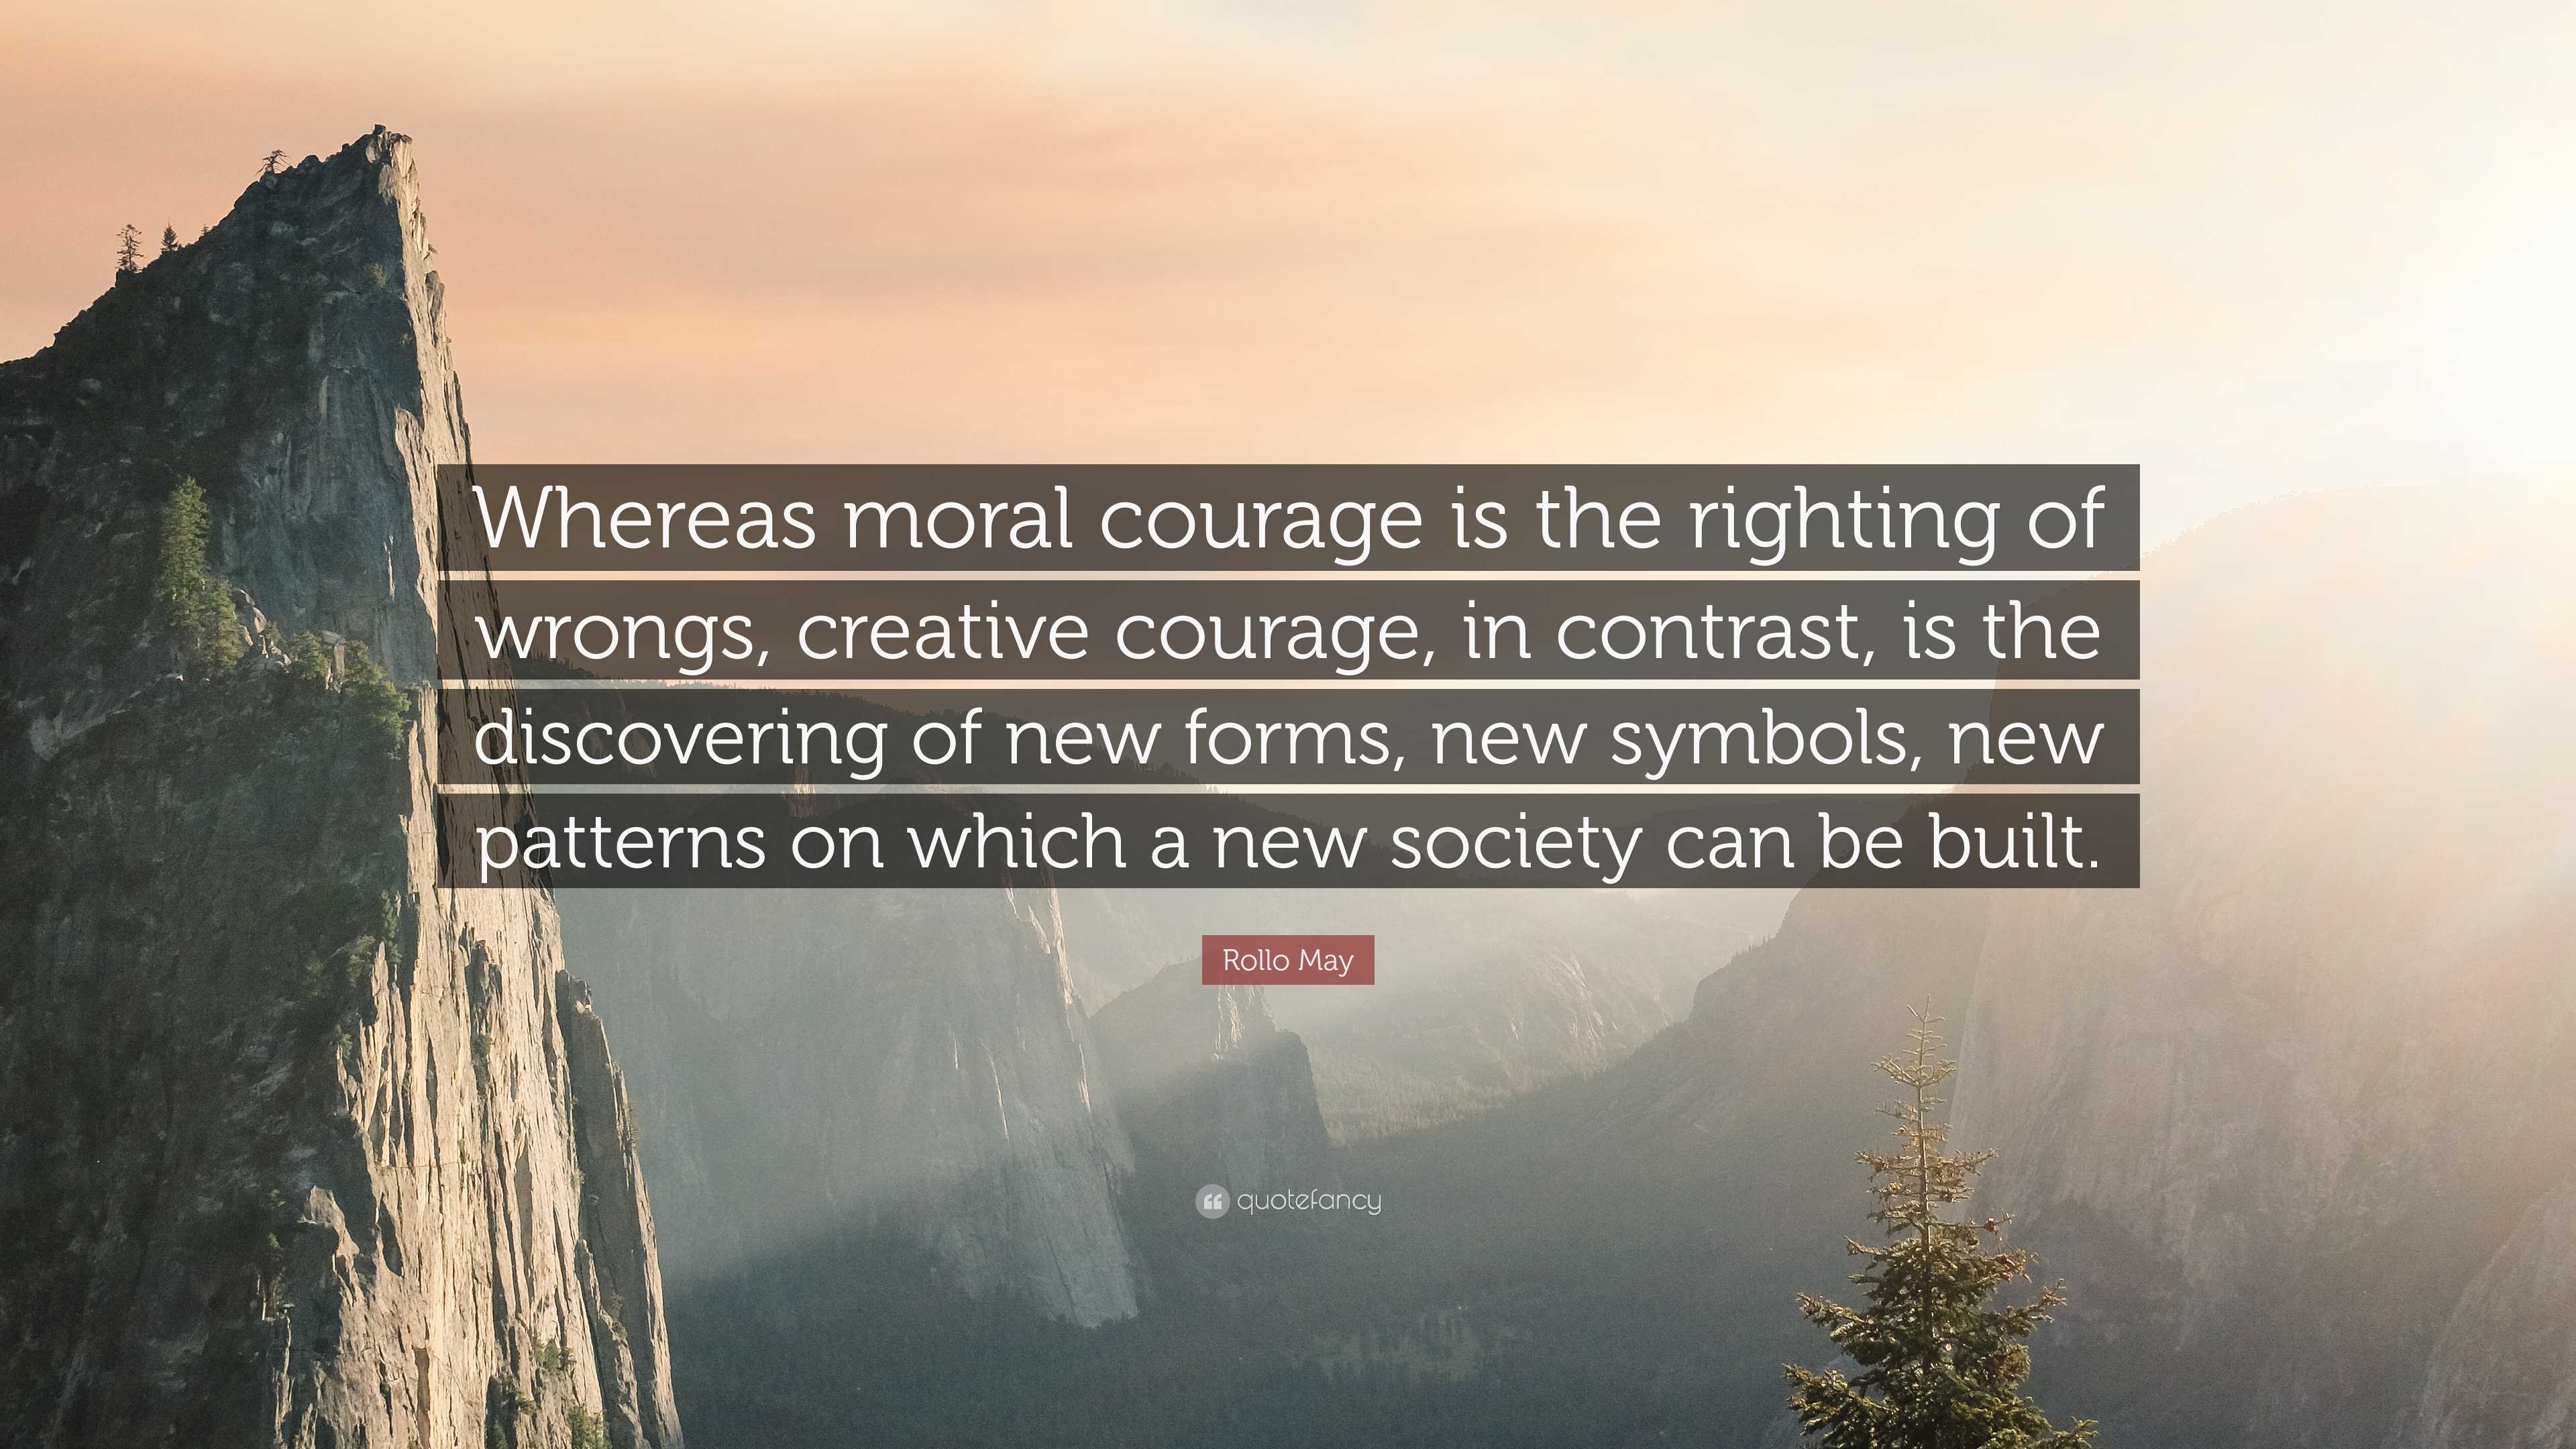 Rollo May Quote: “Whereas moral courage is the righting of wrongs, creative  courage, in contrast, is the discovering of new forms, new sym”